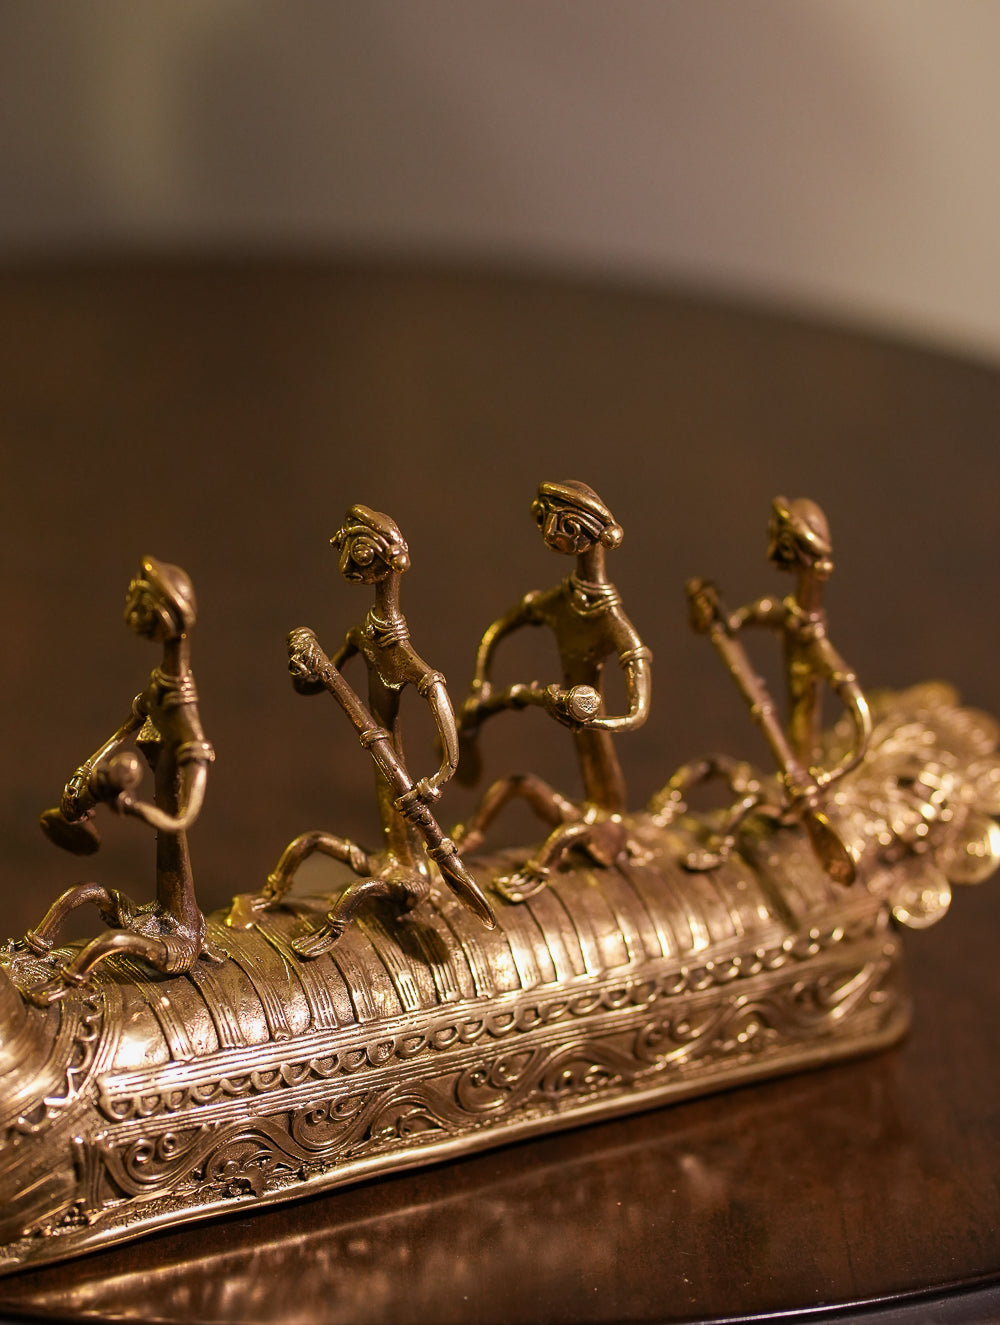 Load image into Gallery viewer, Dhokra Craft Curio - The Boat